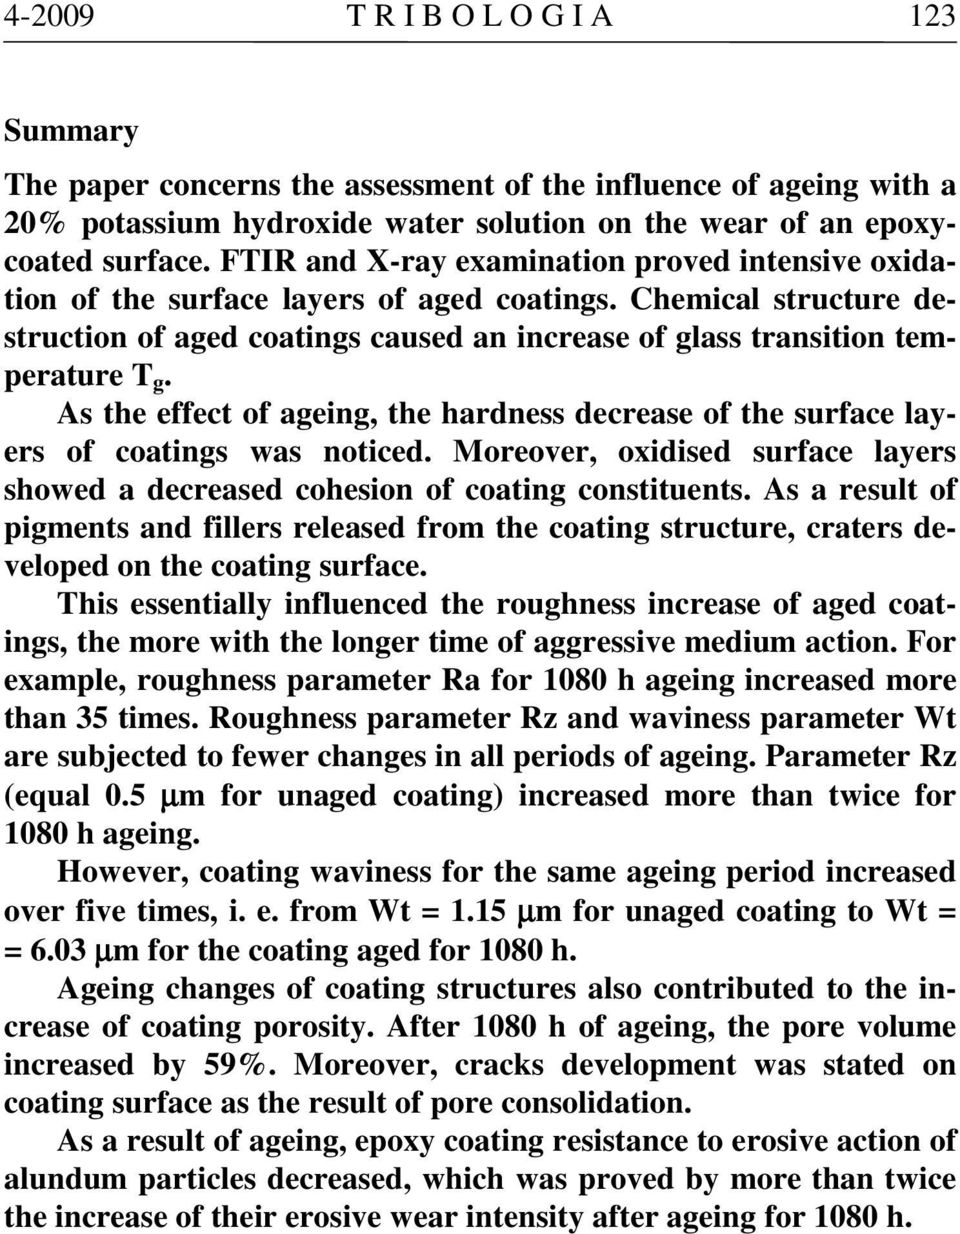 As the effect of ageing, the hardness decrease of the surface layers of coatings was noticed. Moreover, oxidised surface layers showed a decreased cohesion of coating constituents.